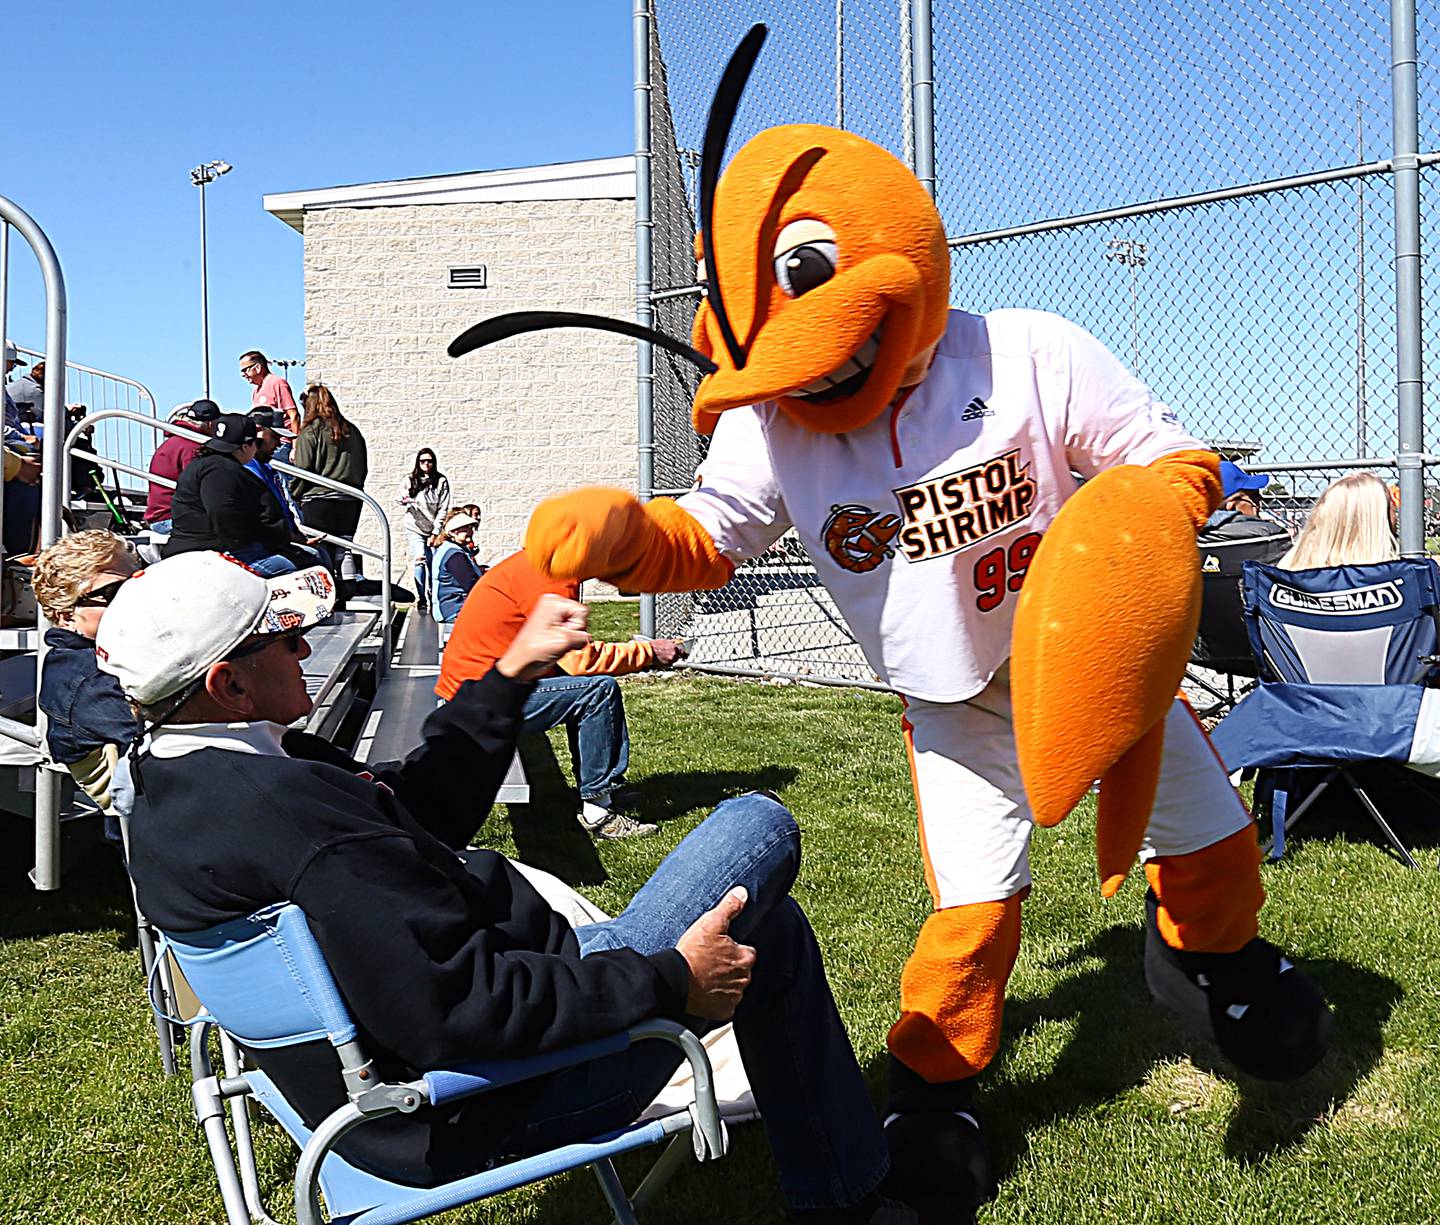 Illinois Valley Pistol Shrimp mascot South Claw Sam high-fives fans before the doubleheader against the Lafayette Aviators on Saturday, May 29, 2021, at Veterans Memorial Park in Peru.